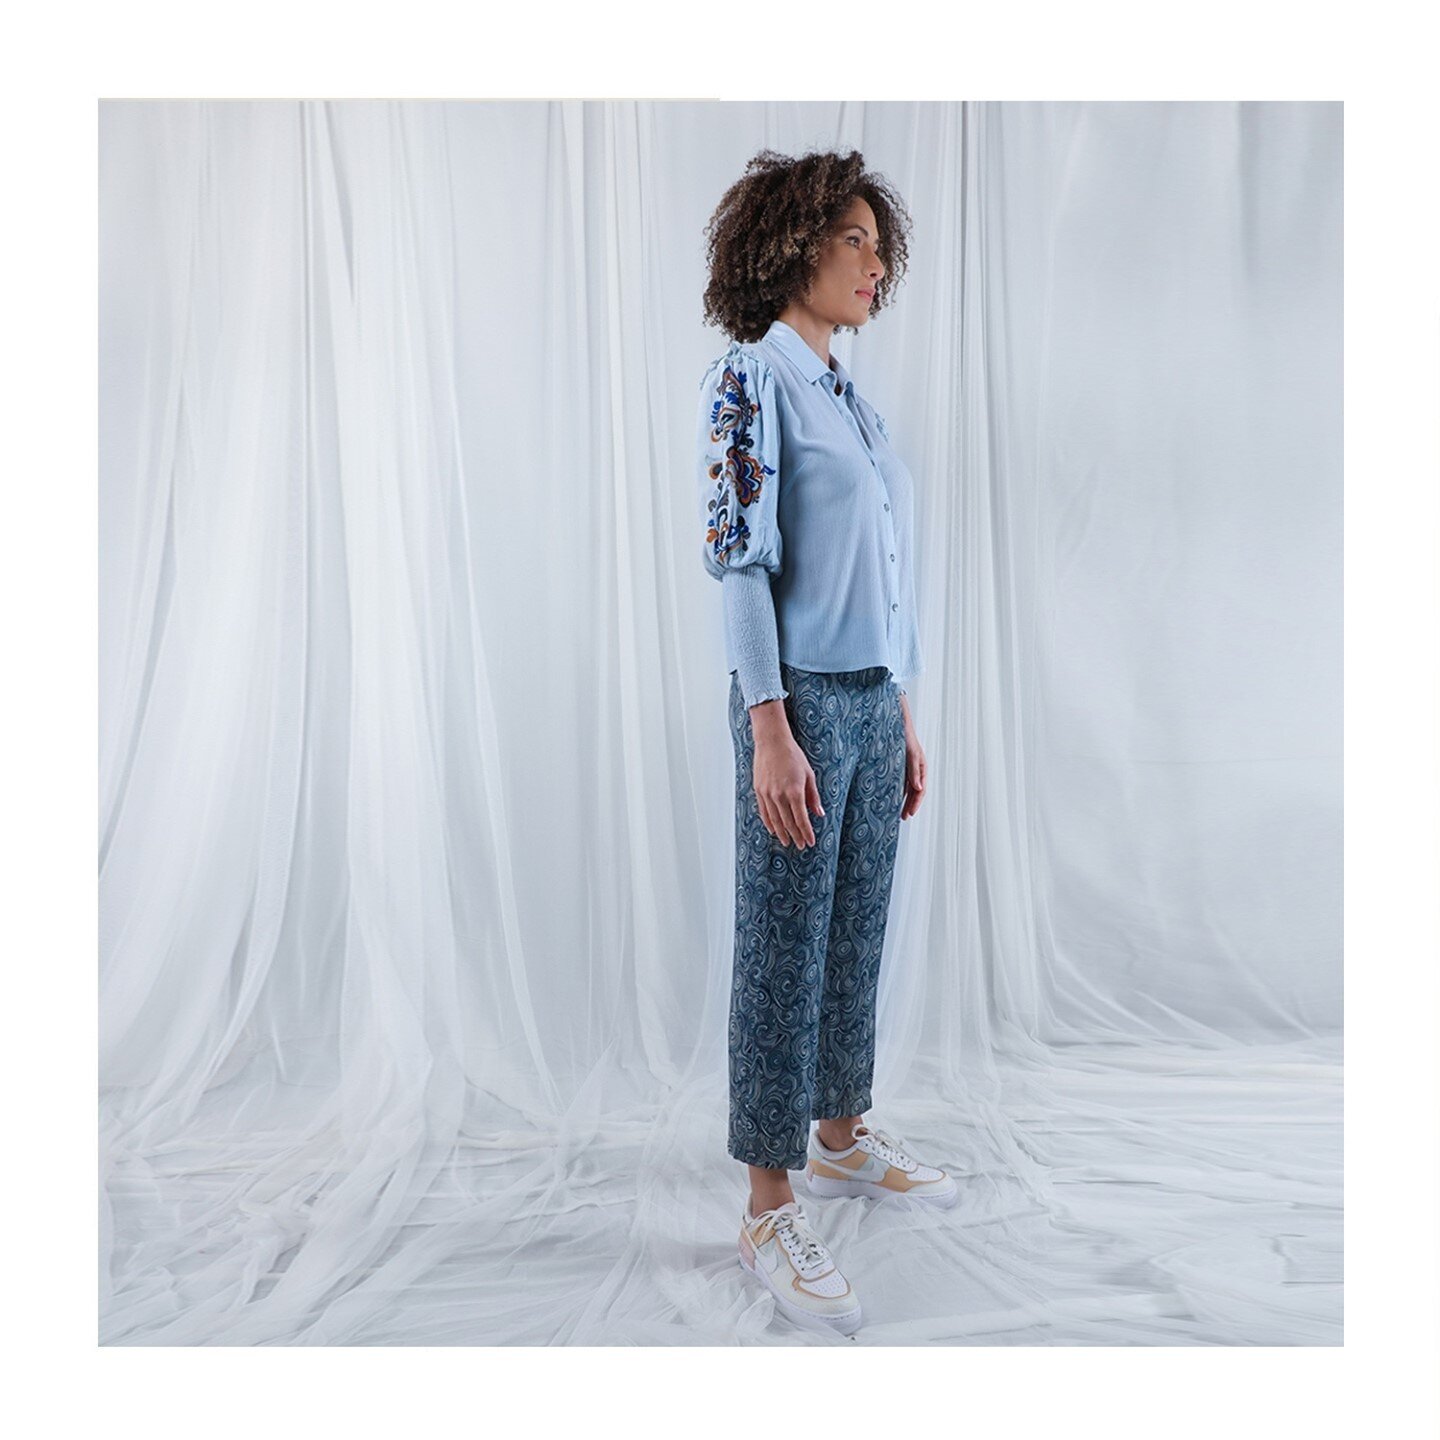 Statement sleeve shirt featuring elasticated cuff detail paired with our microprint trouser.⁠
#bl_nk_london⁠
.⁠
.⁠
.⁠
.⁠
.⁠
.⁠
.⁠
.⁠
.⁠
.⁠
.⁠
.⁠
#BL_NKSS21 #whowhatwearing #simplethingsmadebeautiful #theartofslowliving #shoplocal #sharingworldofshops